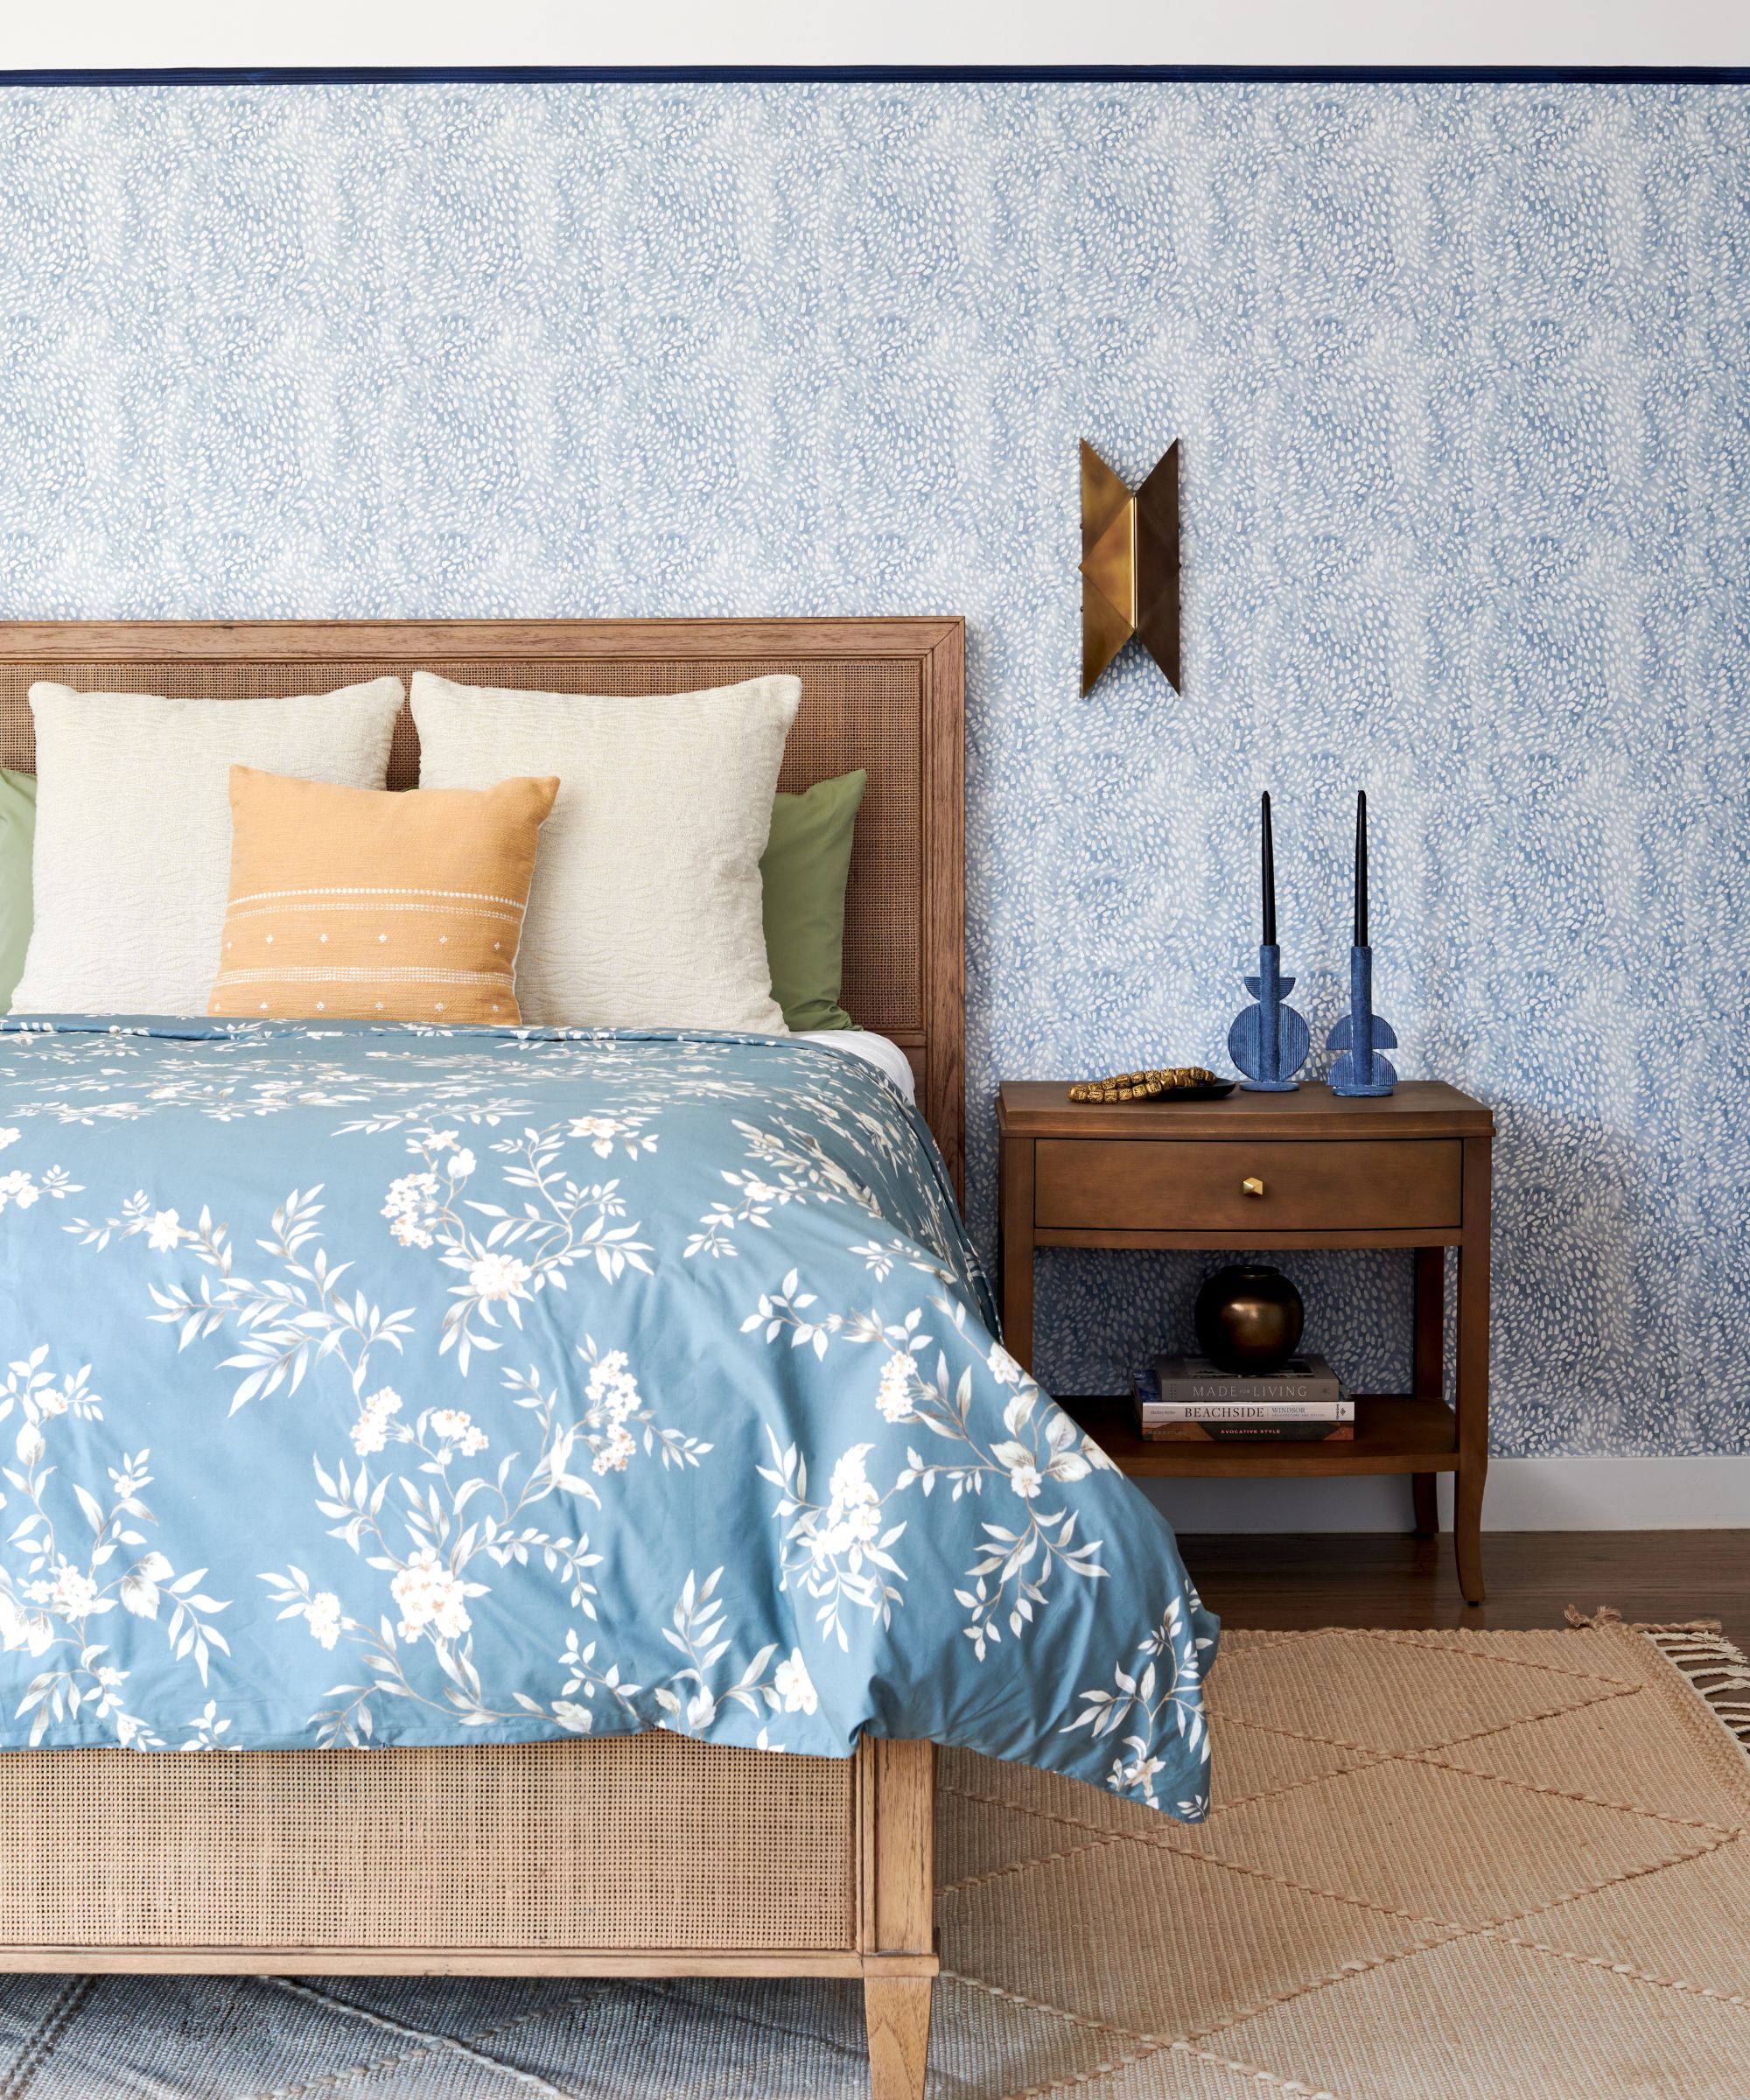 coastal bedroom with blue and white wallpapers and wooden furnishings